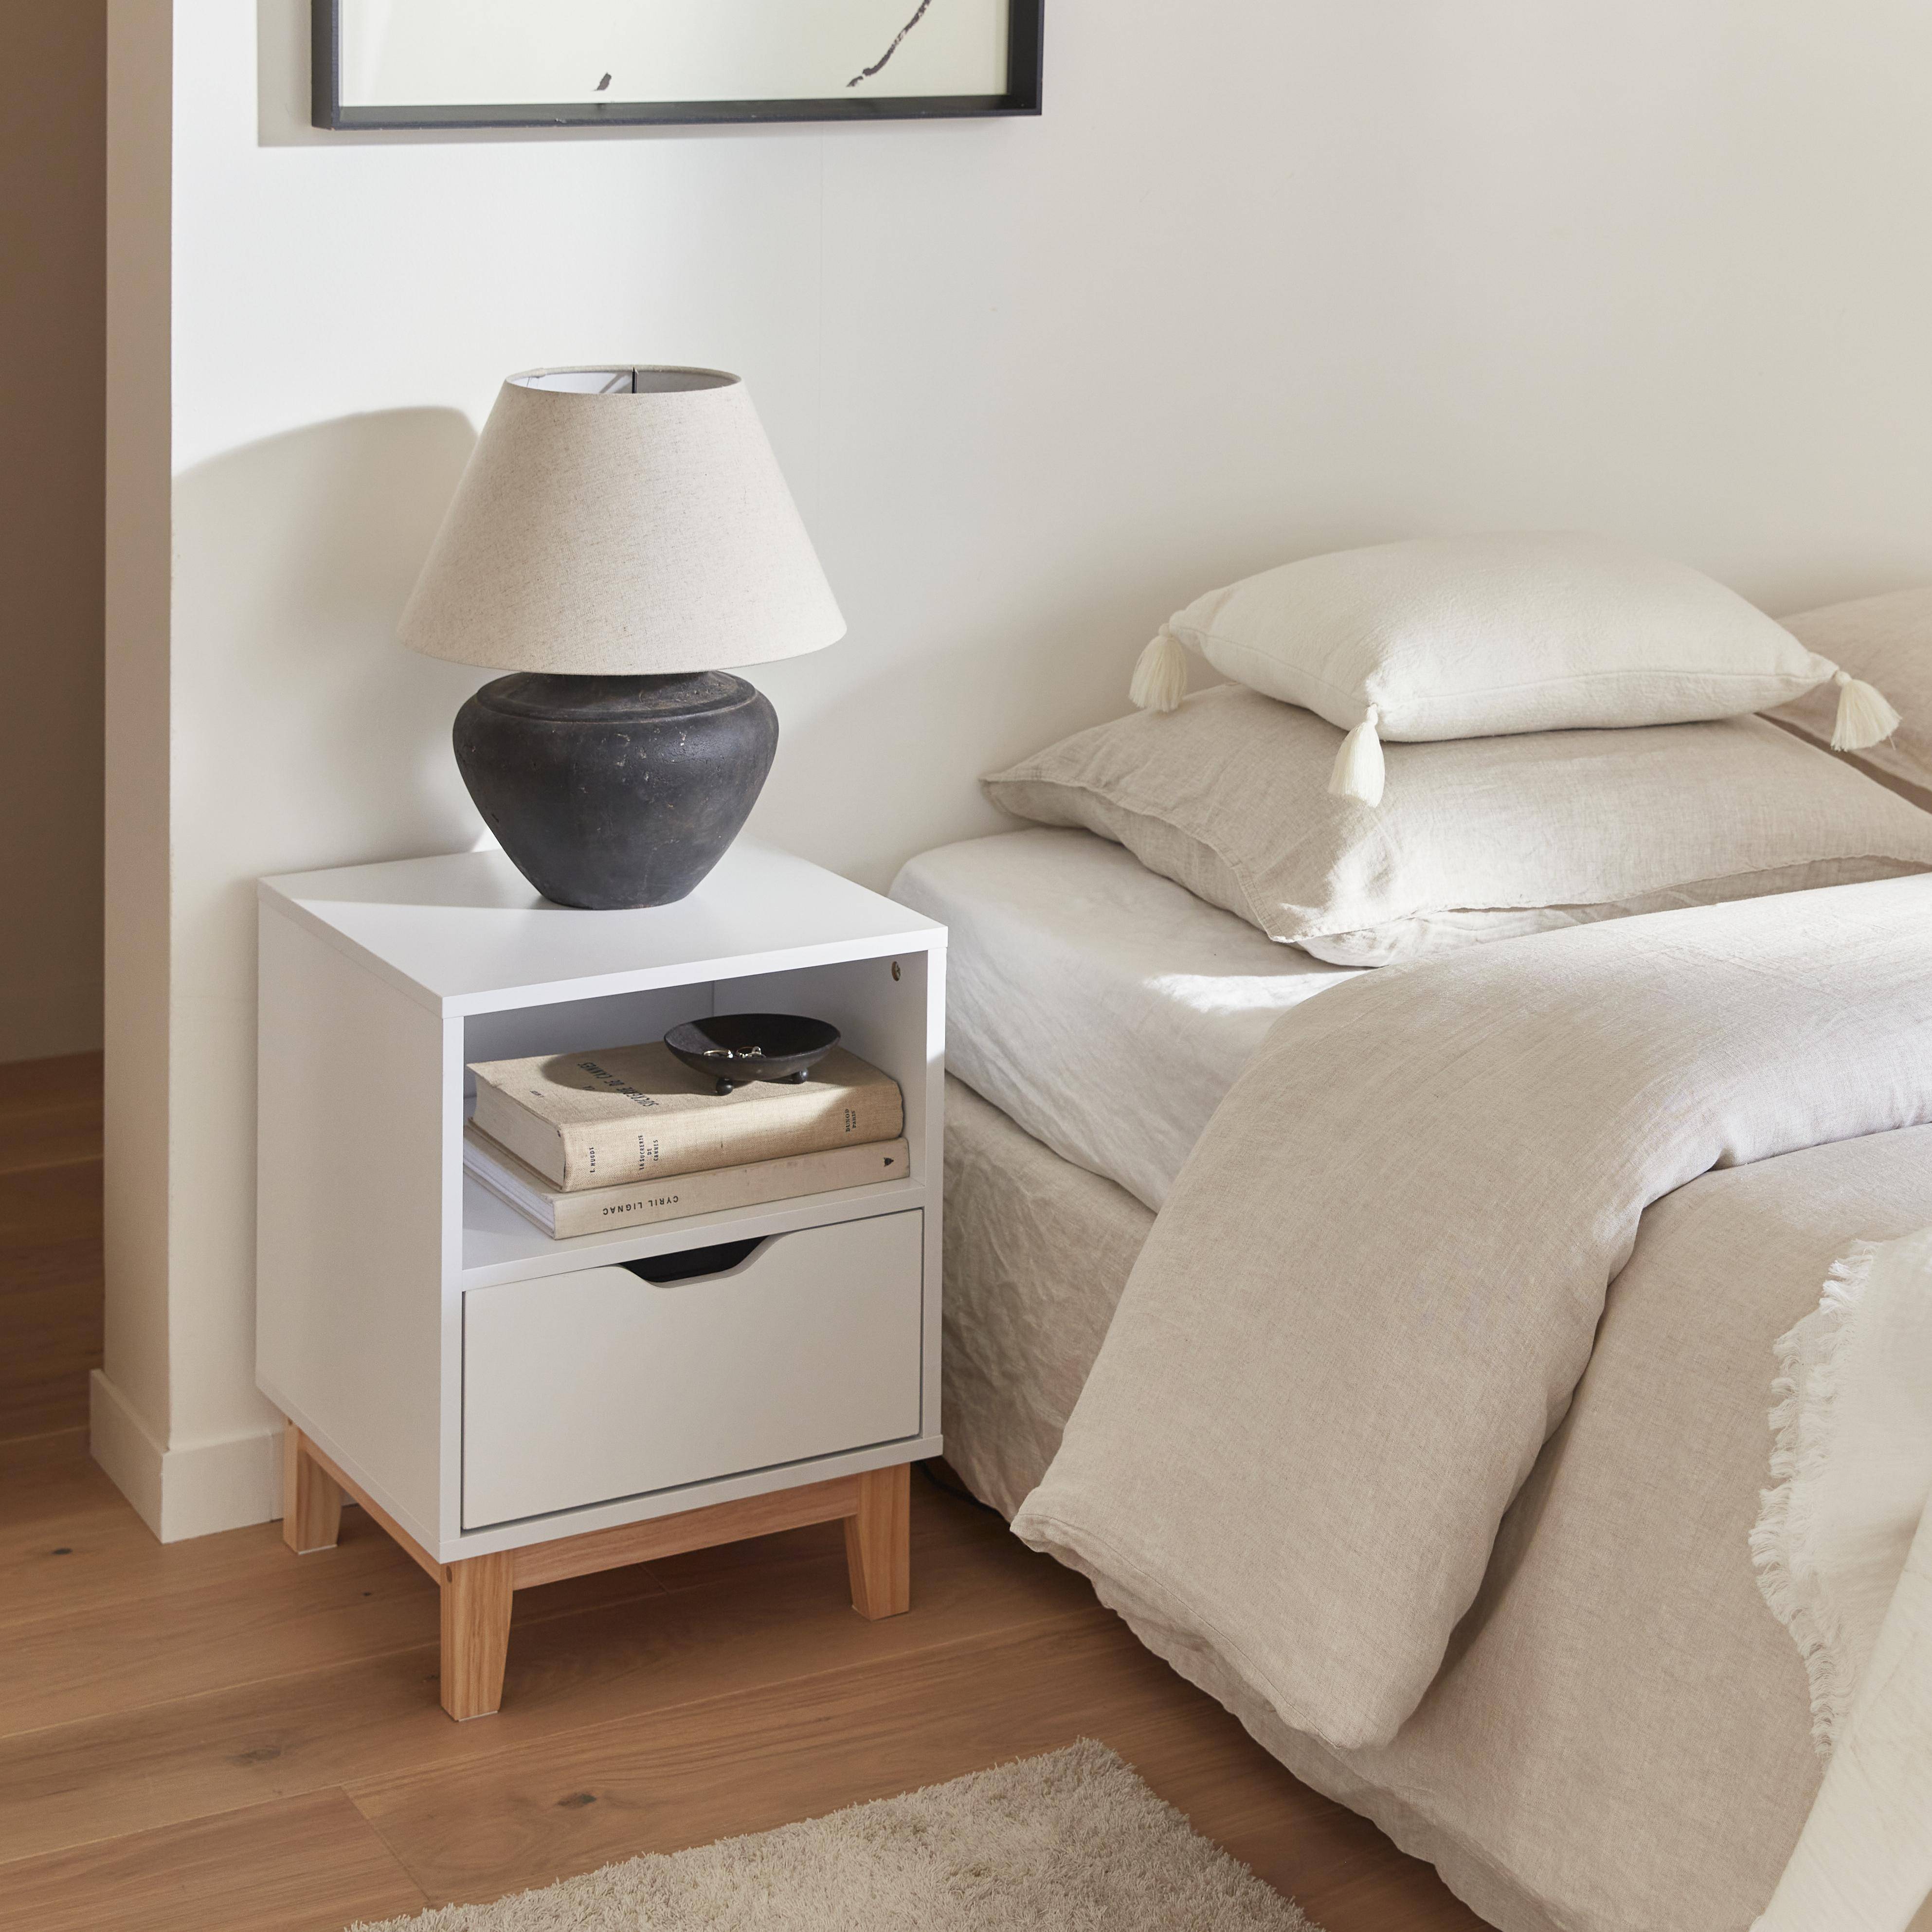 White bedside table with fir wood legs - Floki - 40 x 39 x 52cm - 1 drawer and 1 niche,sweeek,Photo1